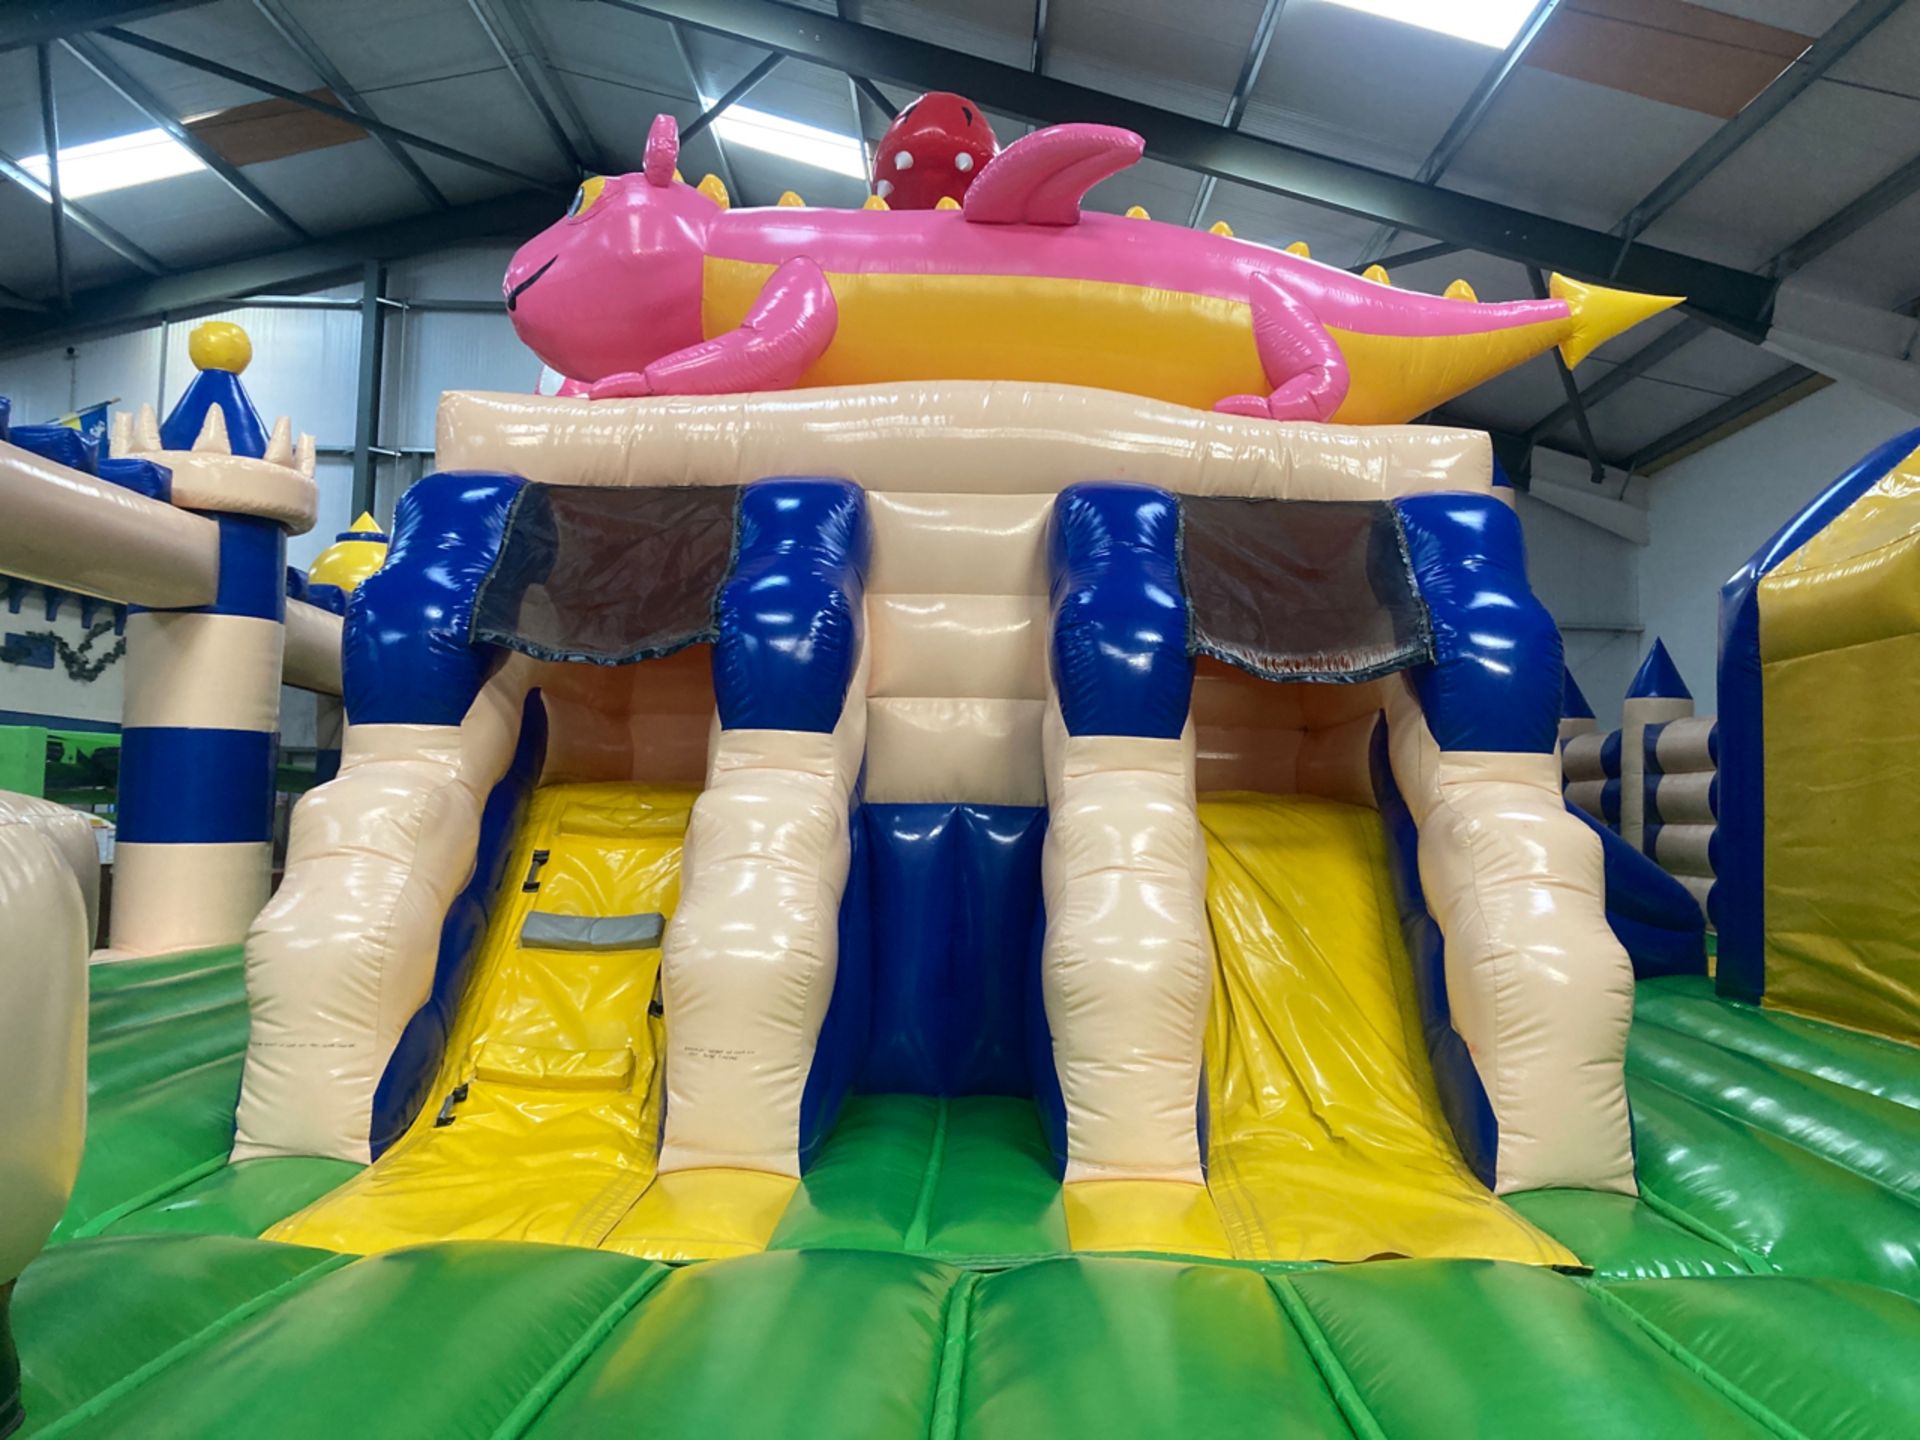 Inflatable bouncy castle - Image 3 of 22